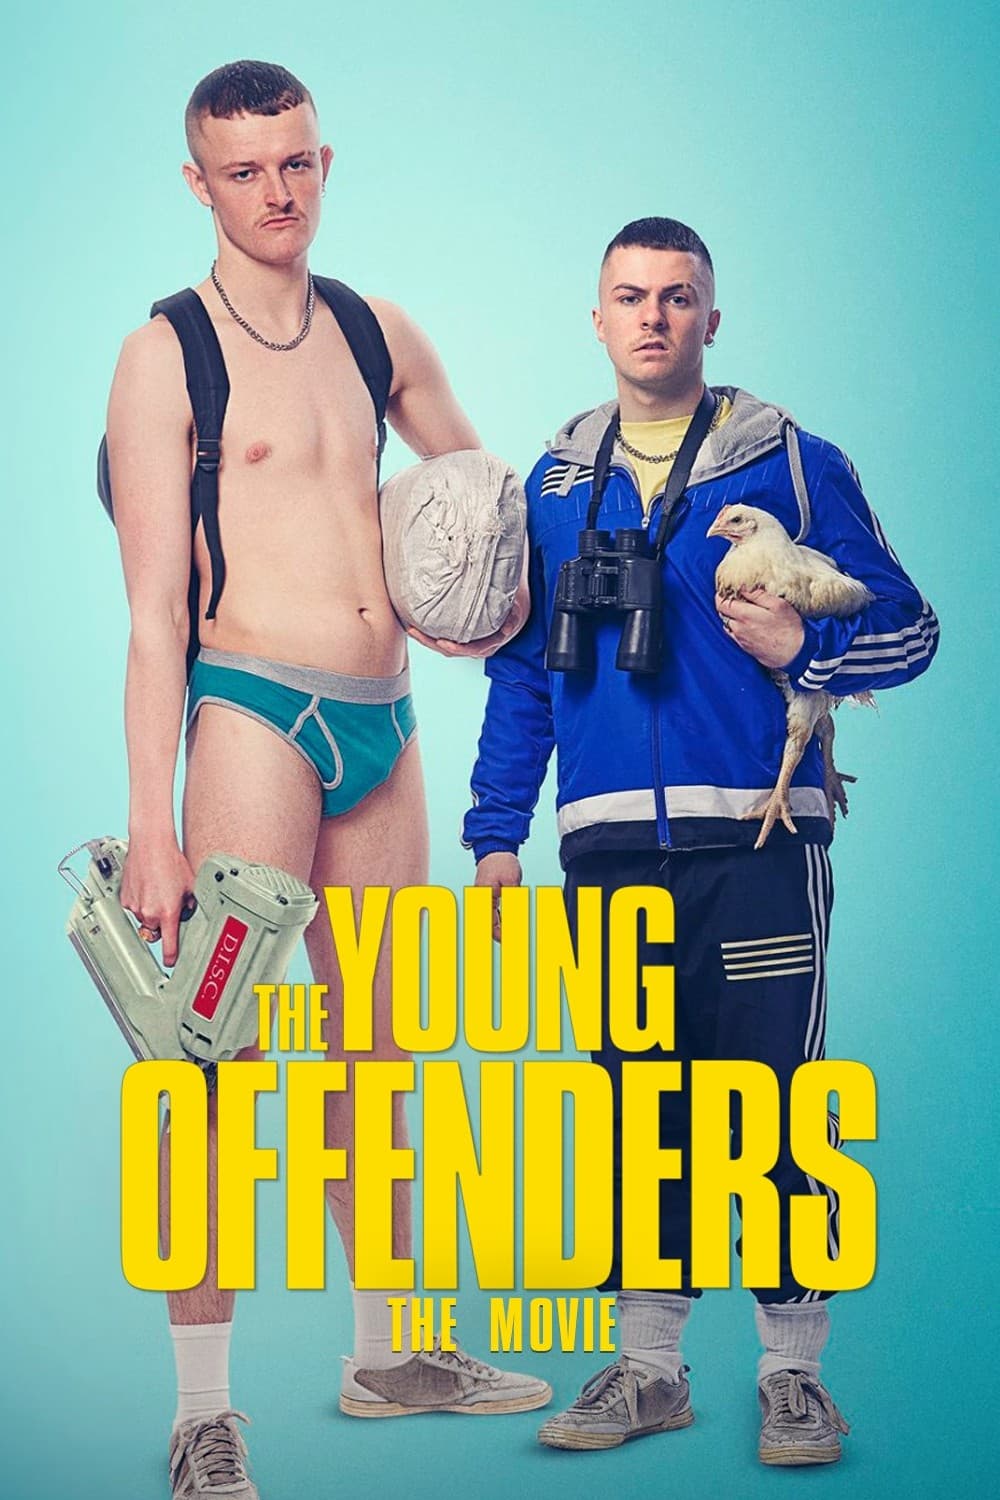 The Young Offenders - The Young Offenders (2016)